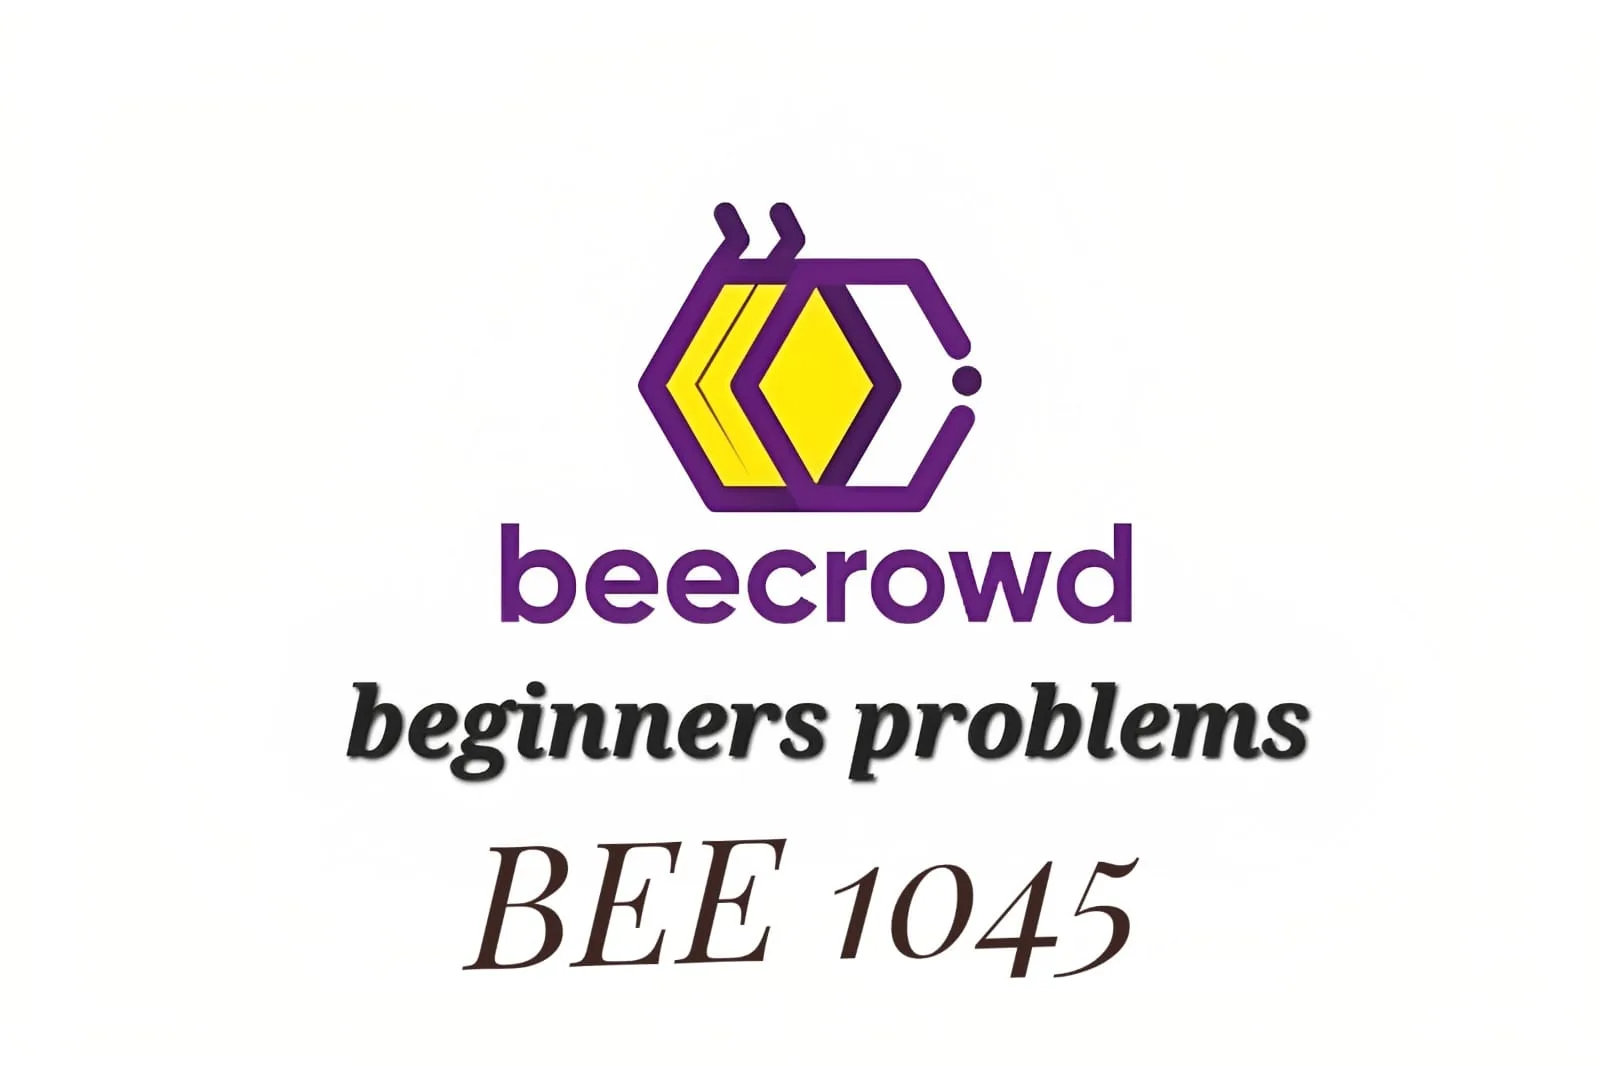 Beecrowd 1045 Triangle Types solution